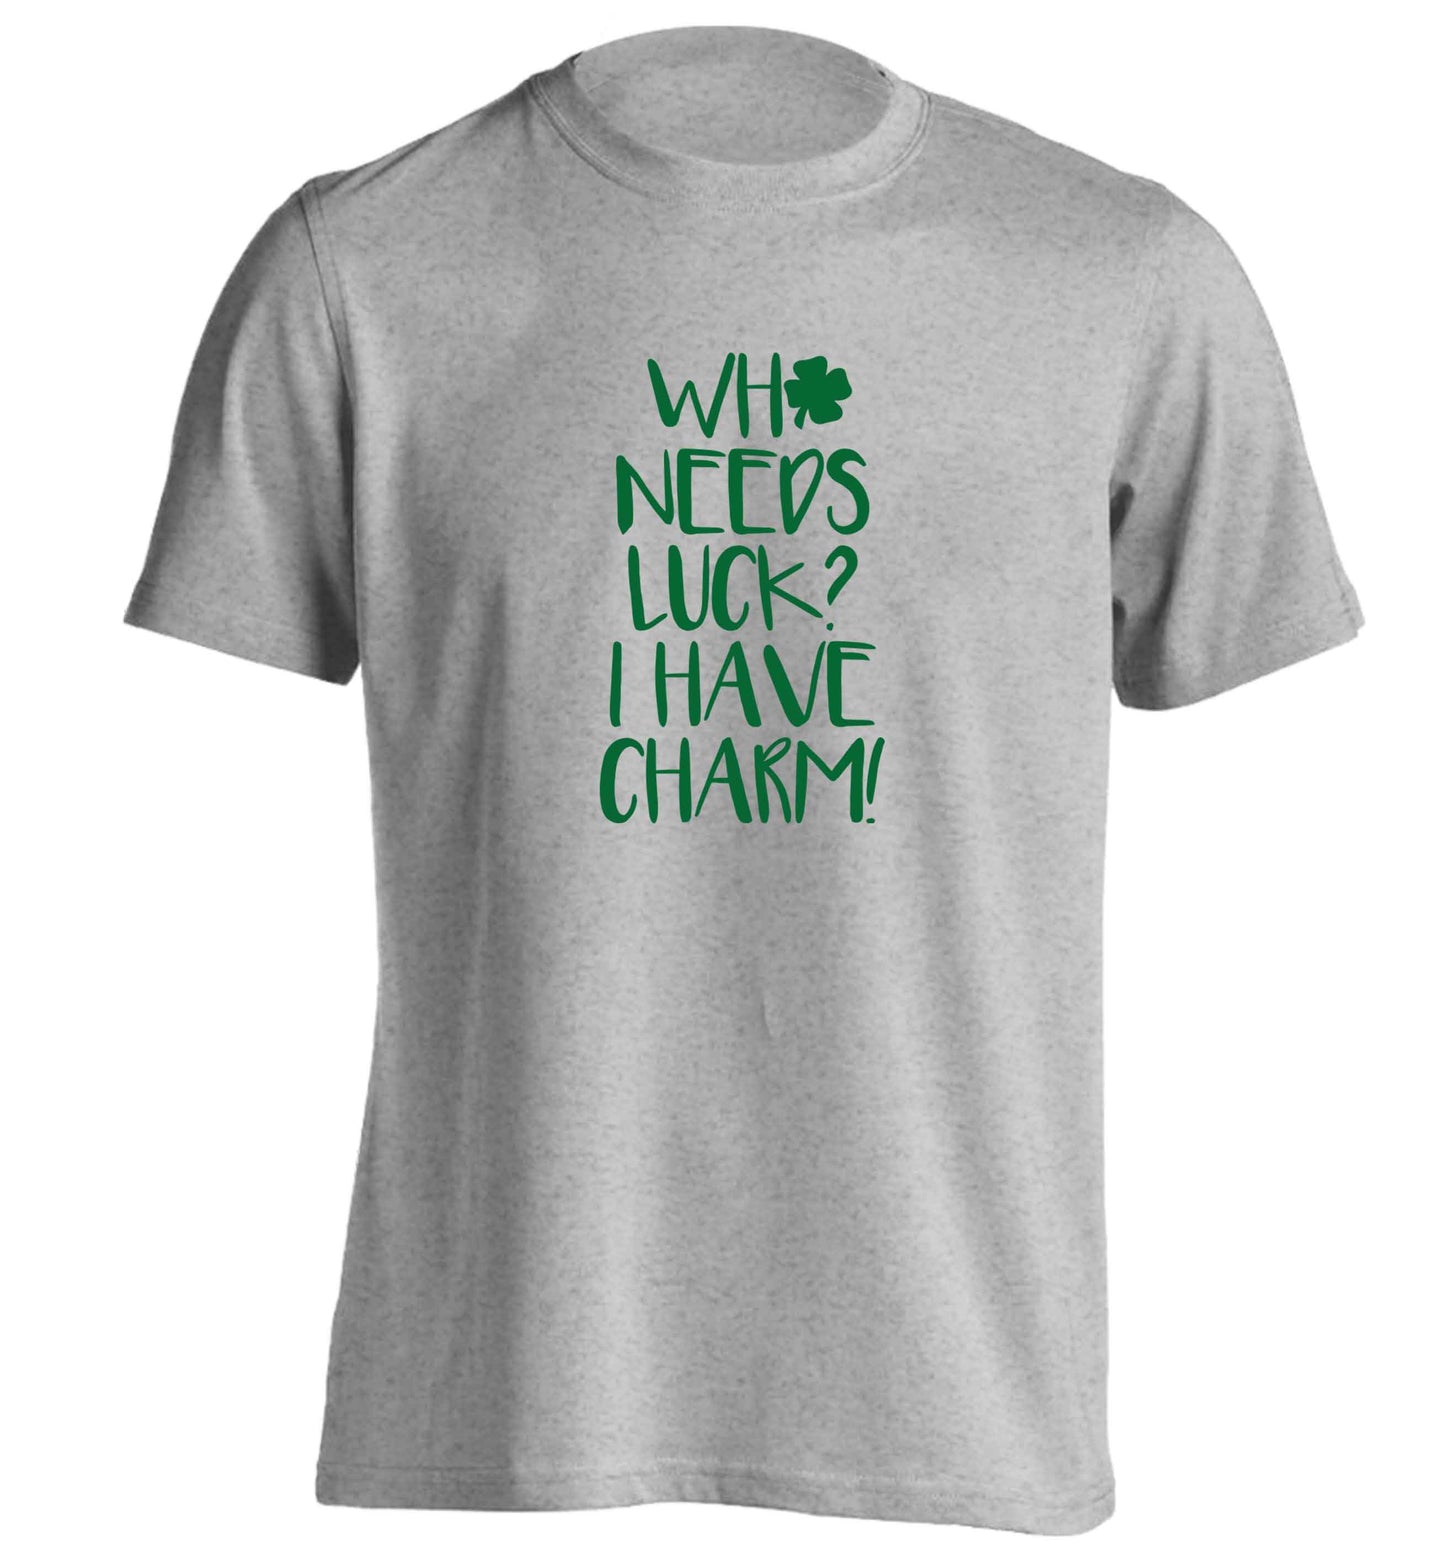 Who needs luck? I have charm! adults unisex grey Tshirt 2XL